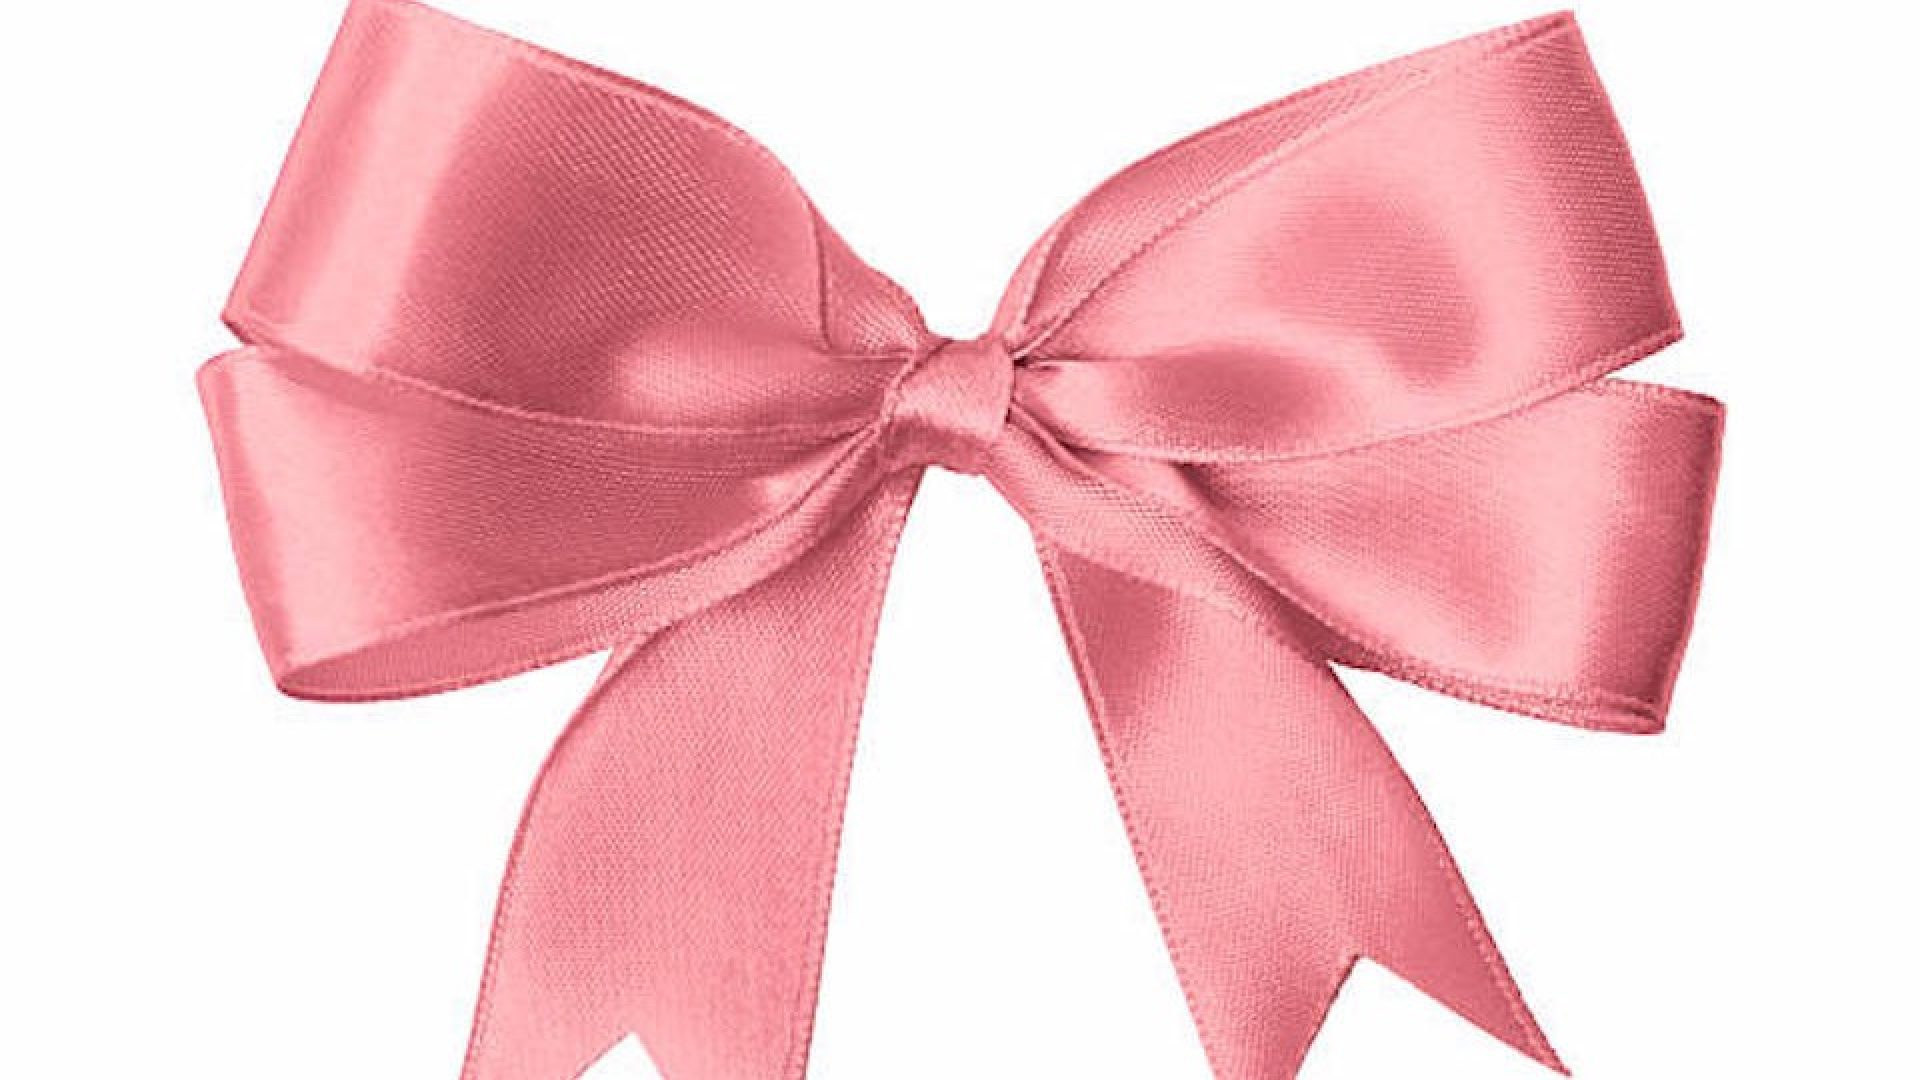 satin roseate Bow isolated on white